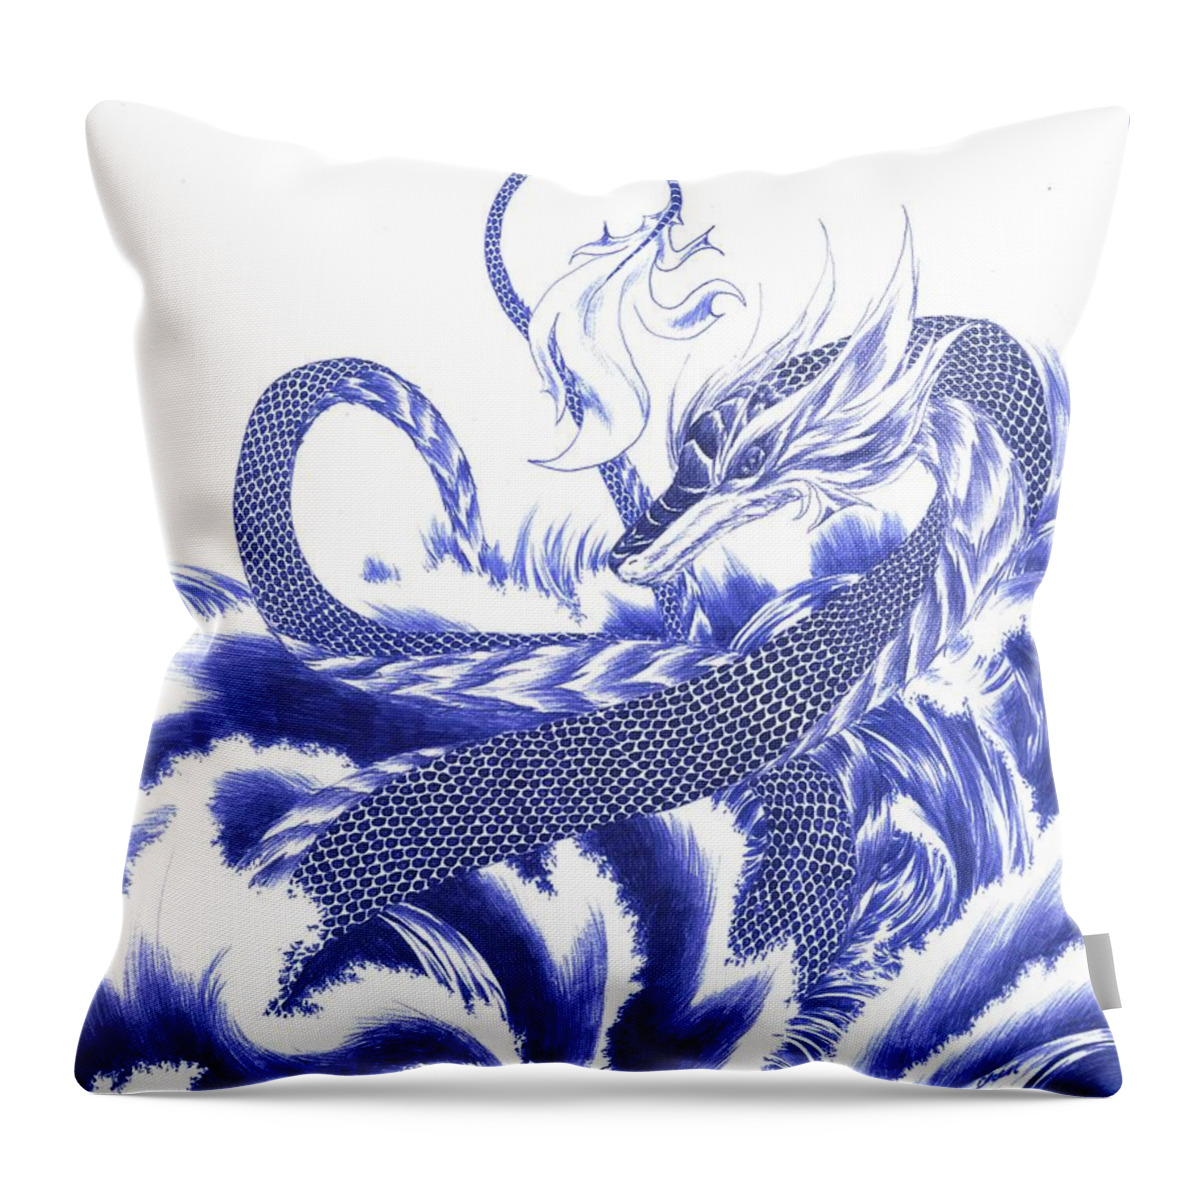 Dragon Throw Pillow featuring the drawing Wisdom by Alice Chen